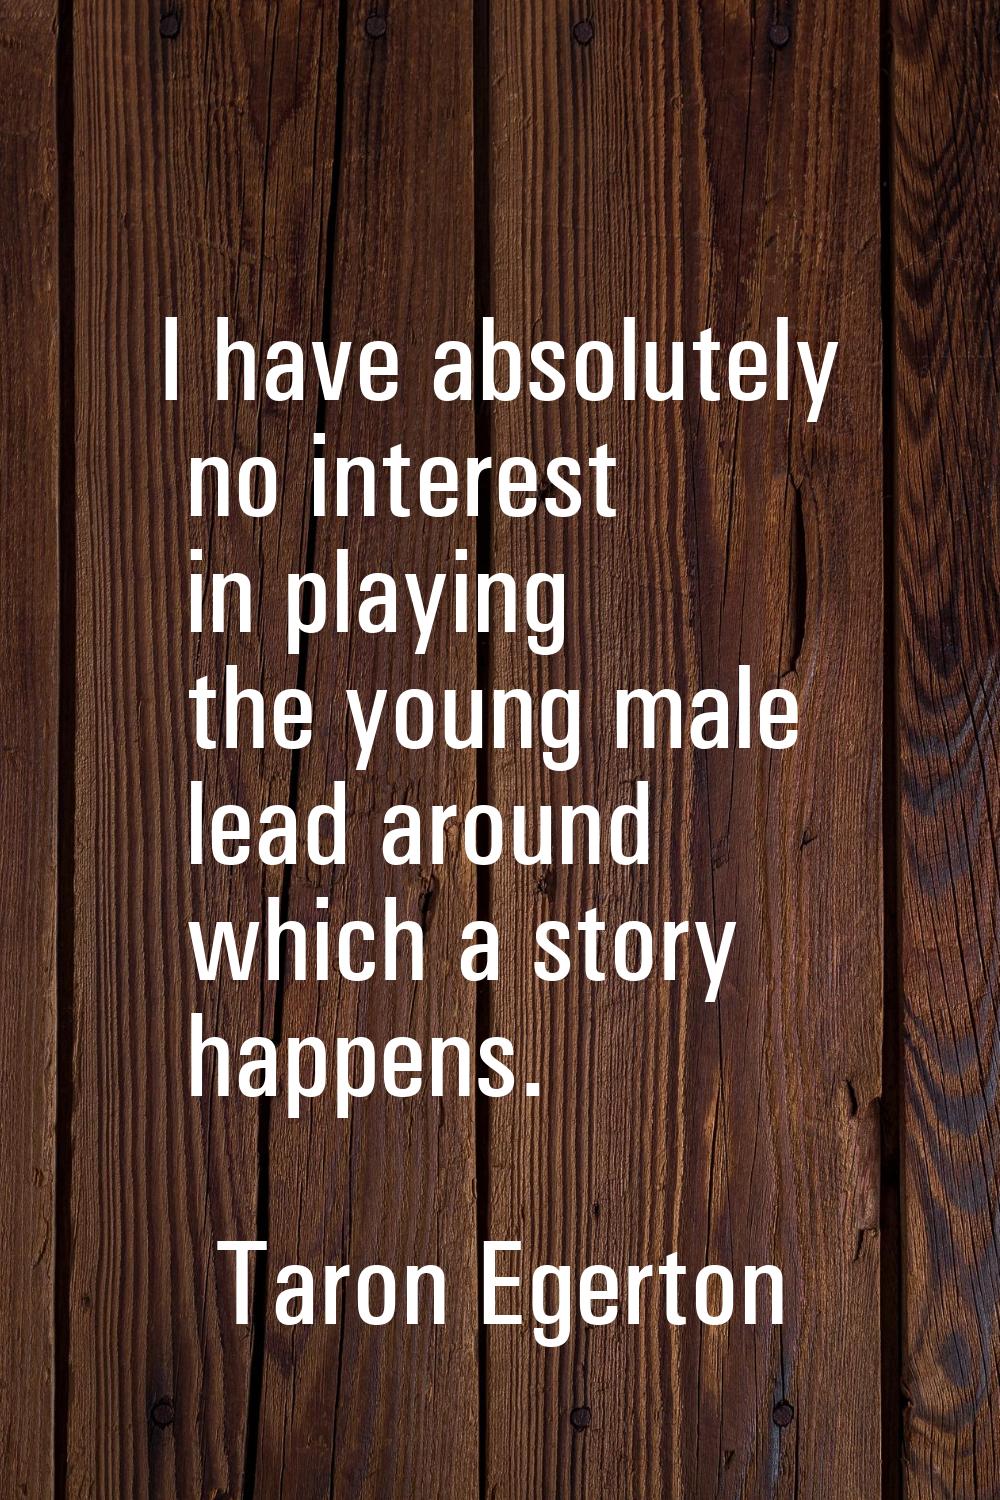 I have absolutely no interest in playing the young male lead around which a story happens.